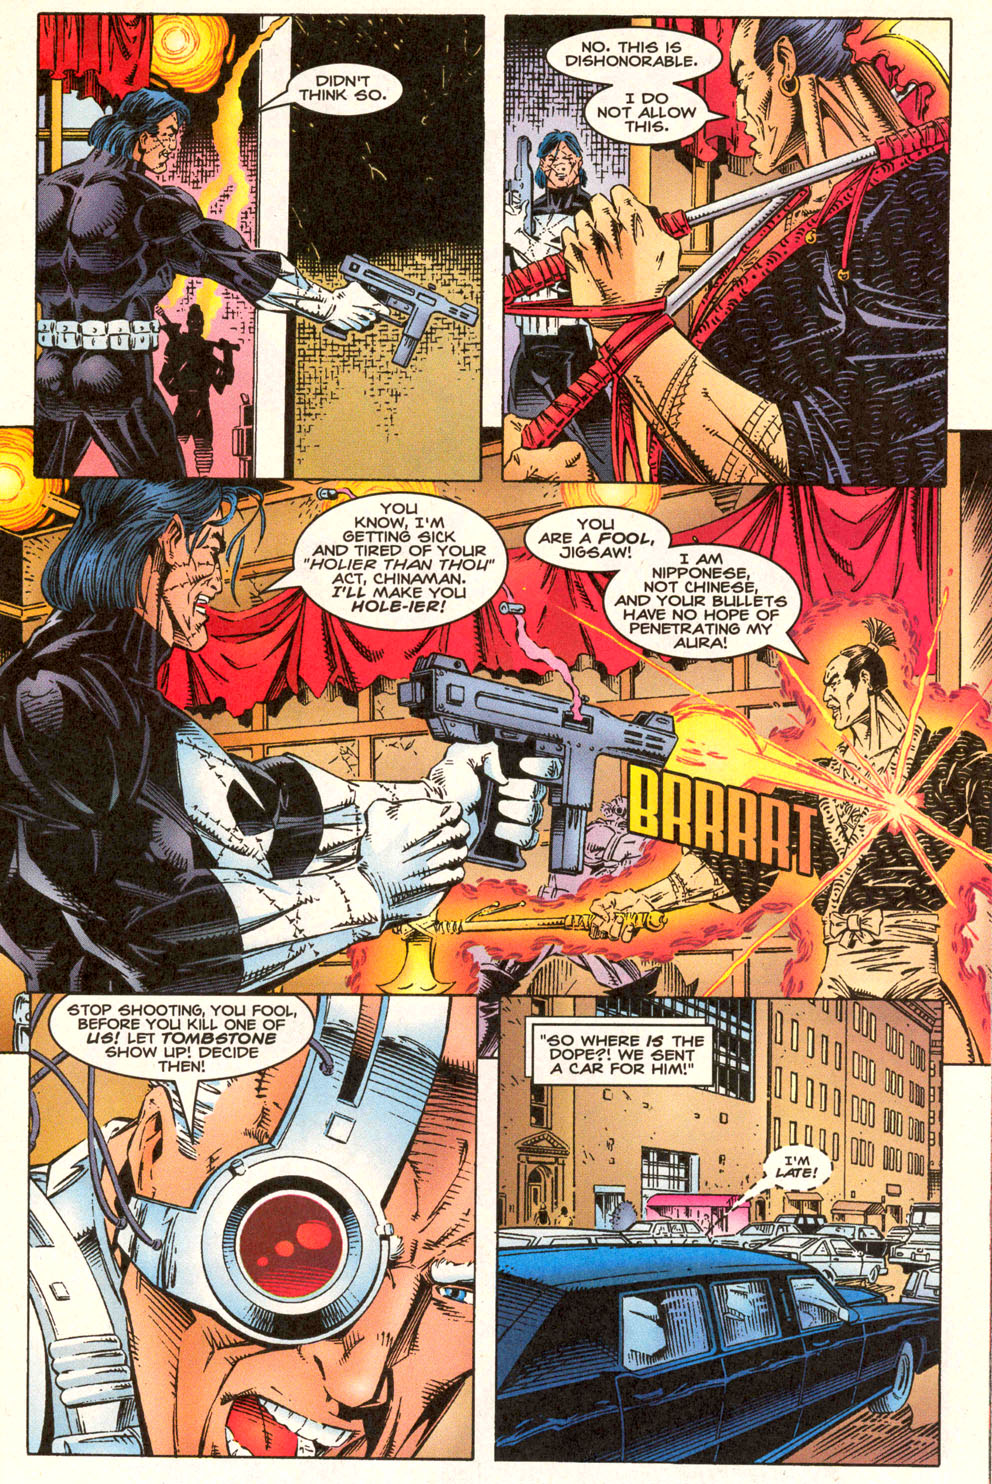 Punisher (1995) issue 10 - Last Shot Fired - Page 4